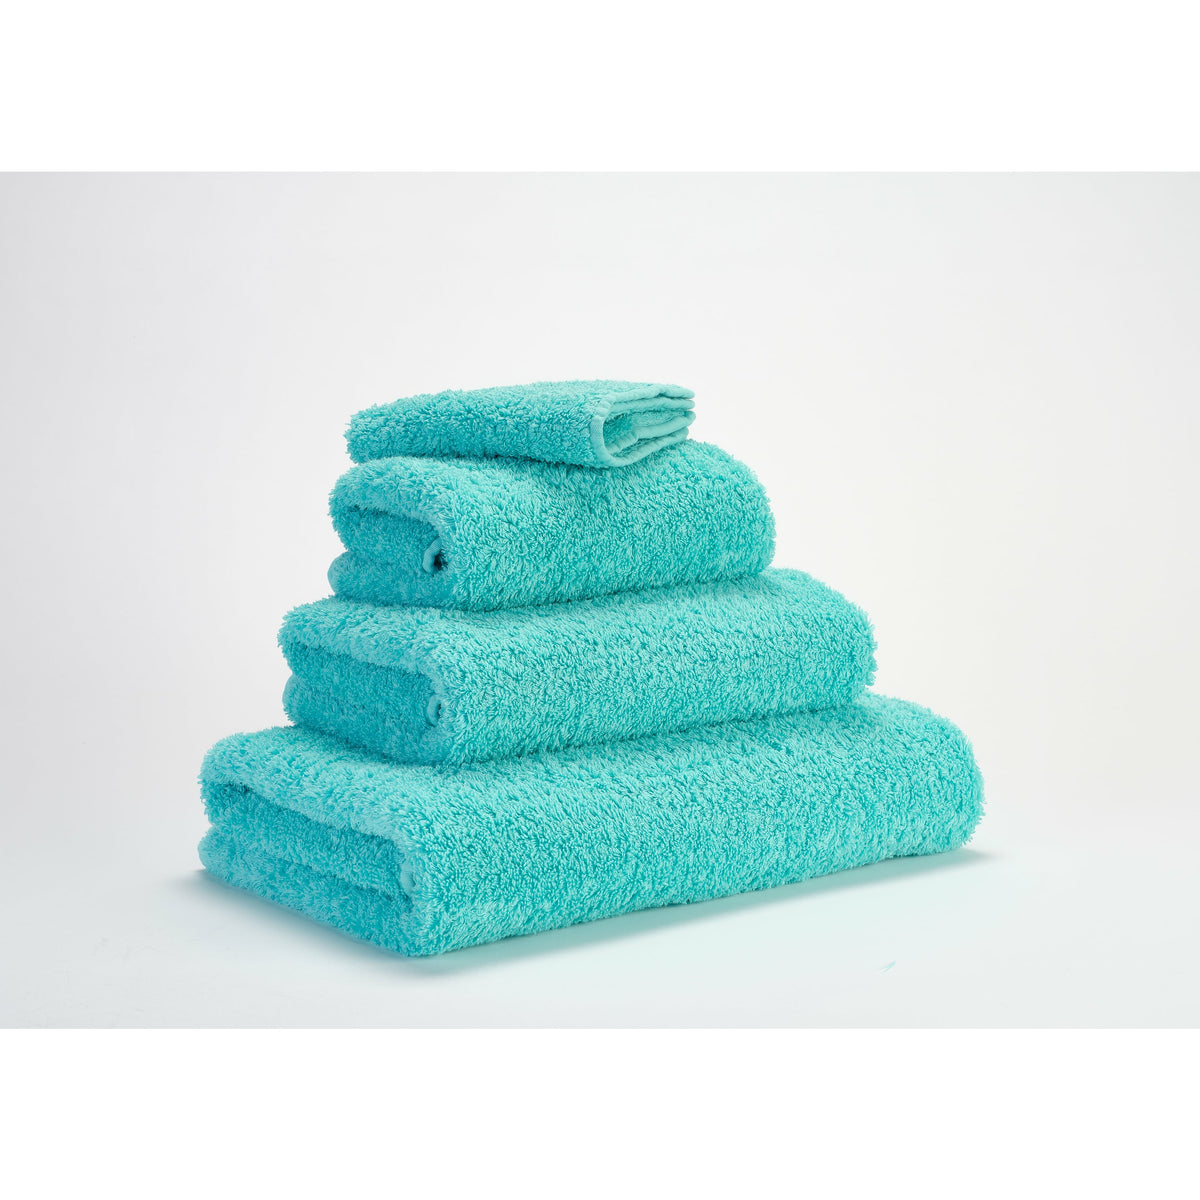 Abyss Super Pile Bath Towels Turquoise Fine Linens Stack Slanted